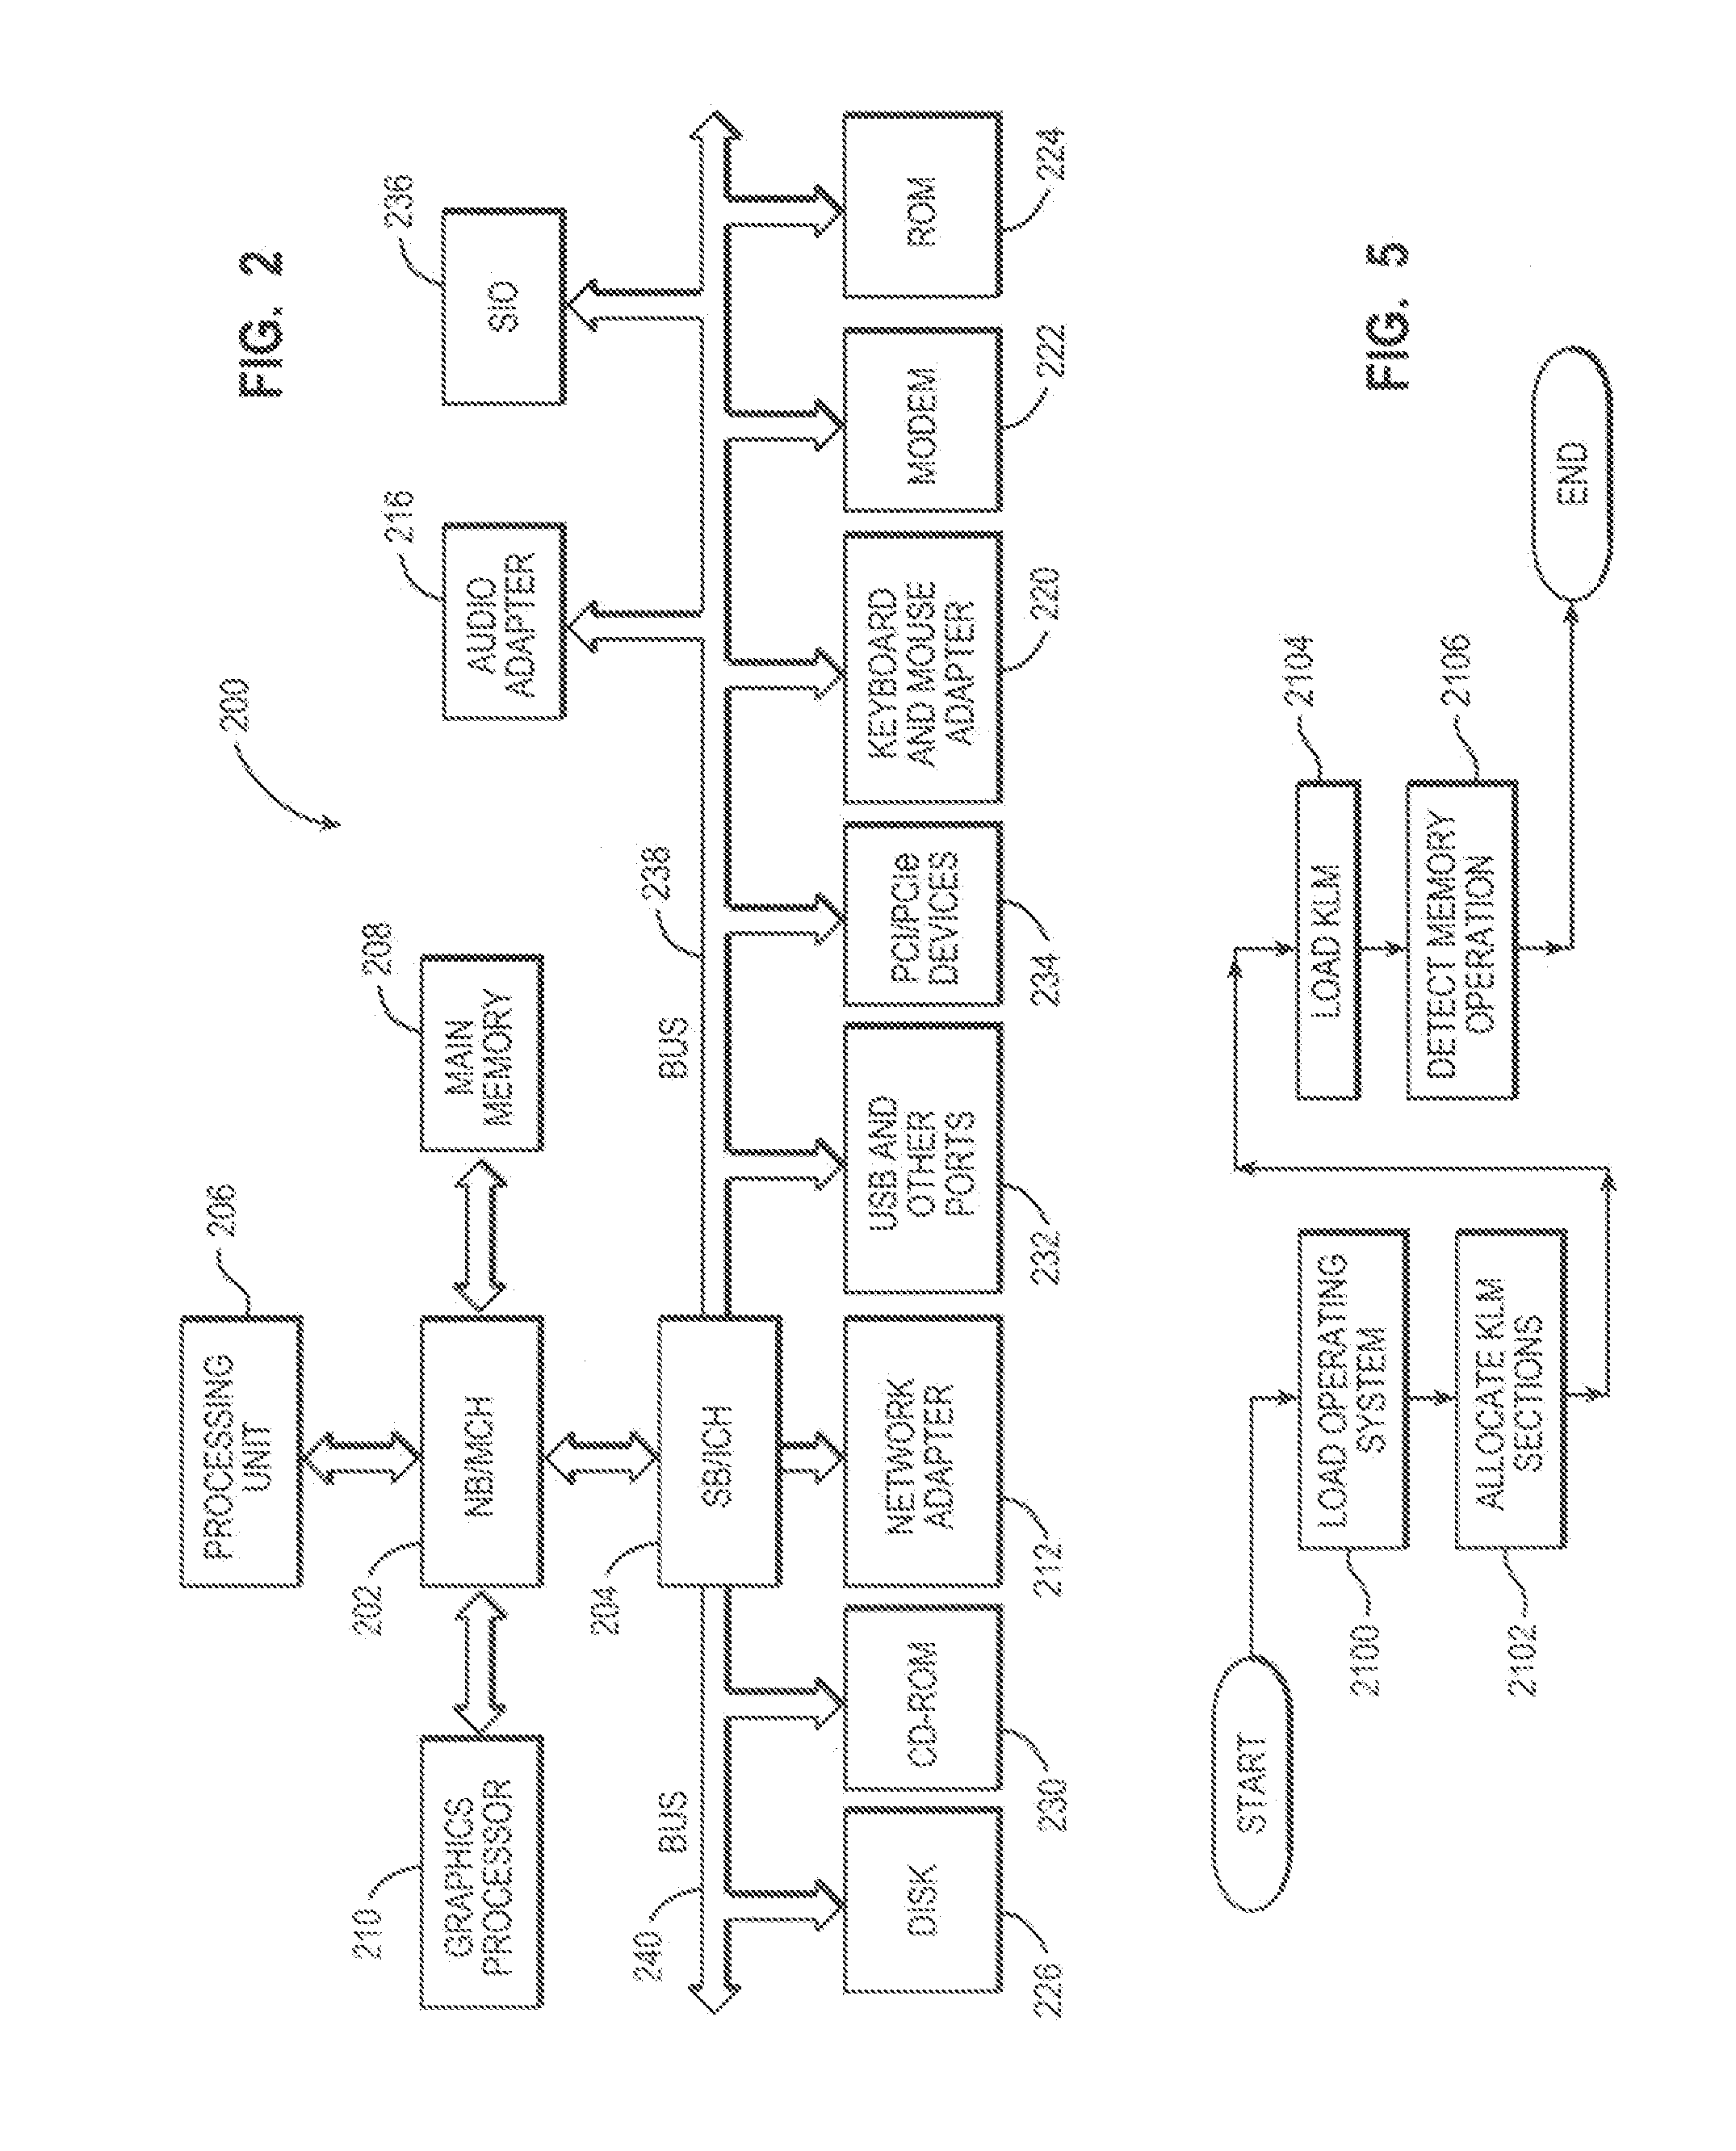 Memory allocation with identification of requesting loadable kernel module